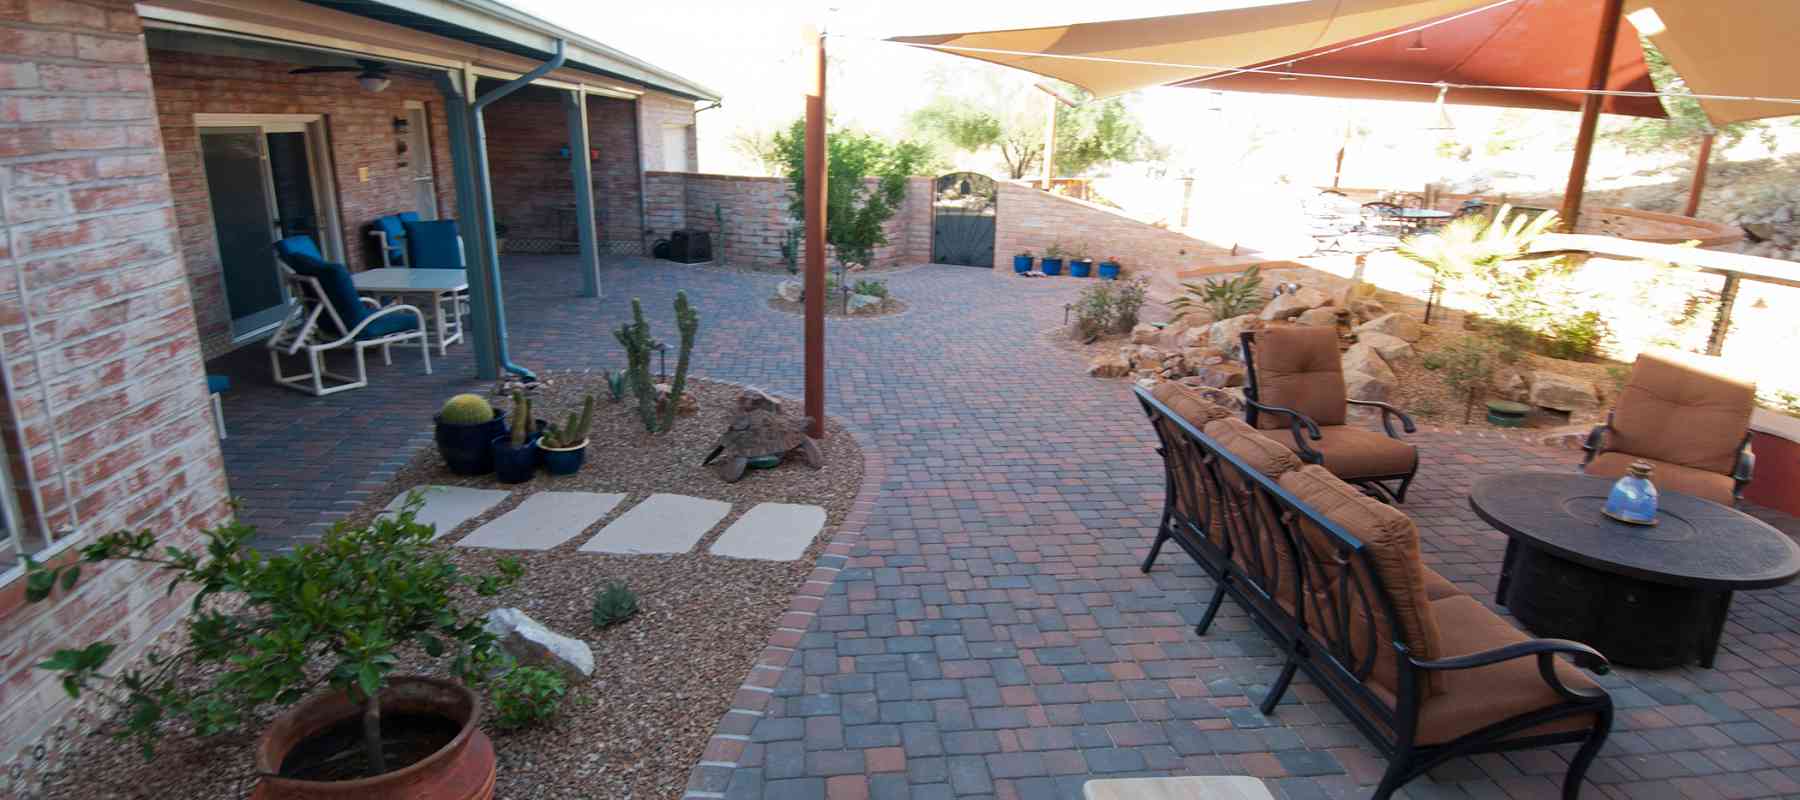 Creating a New Outdoor Living Space